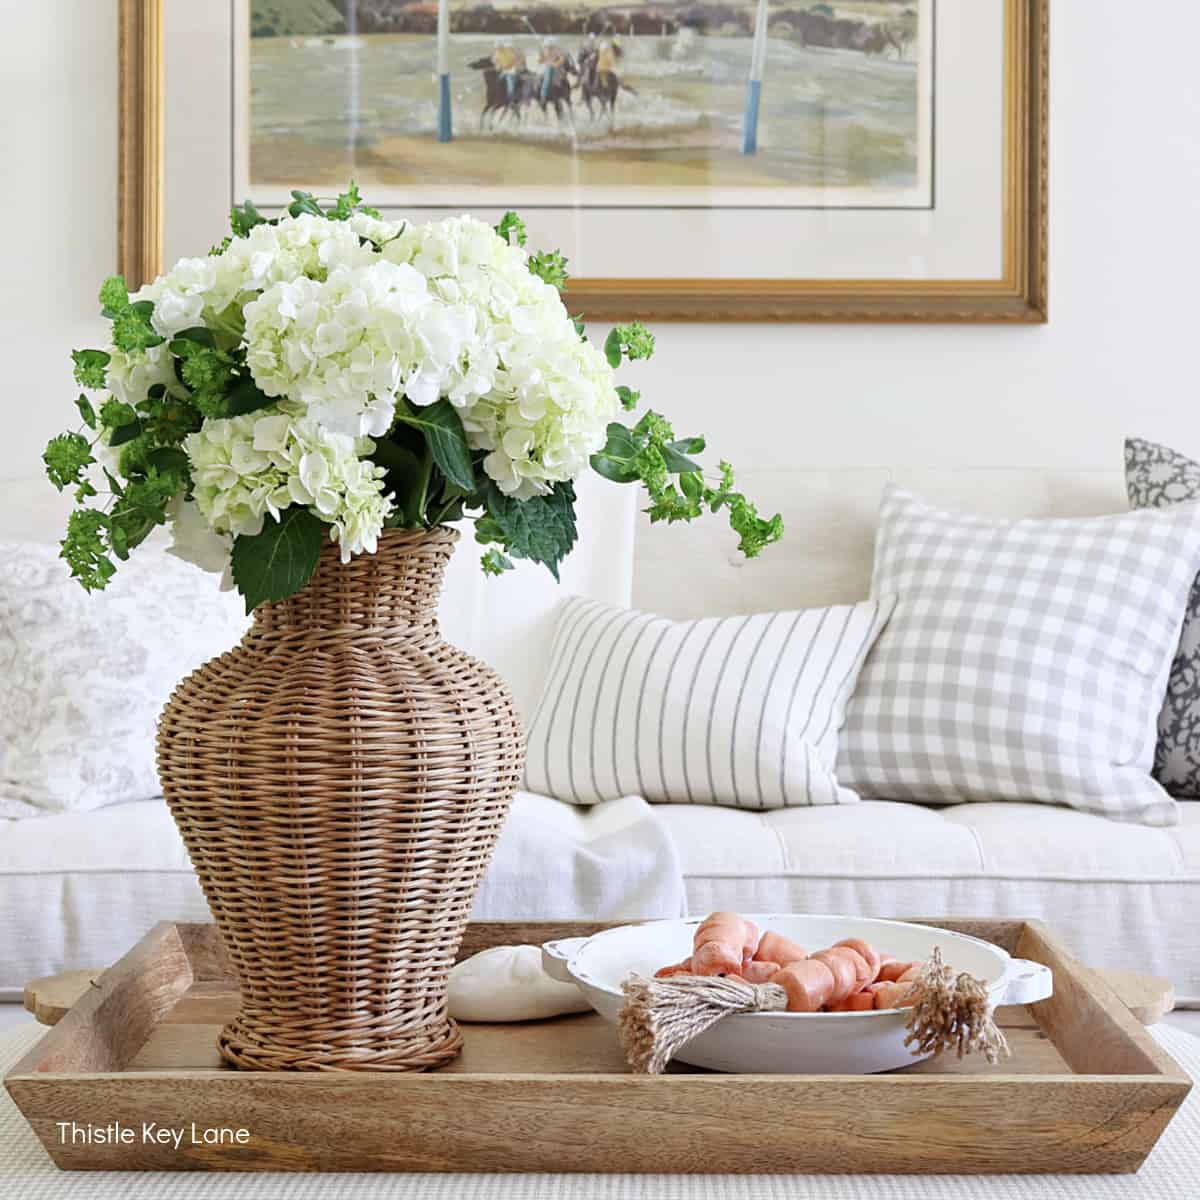 Neutral Summer Styling Living Room Home Tour - Thistle Key Lane